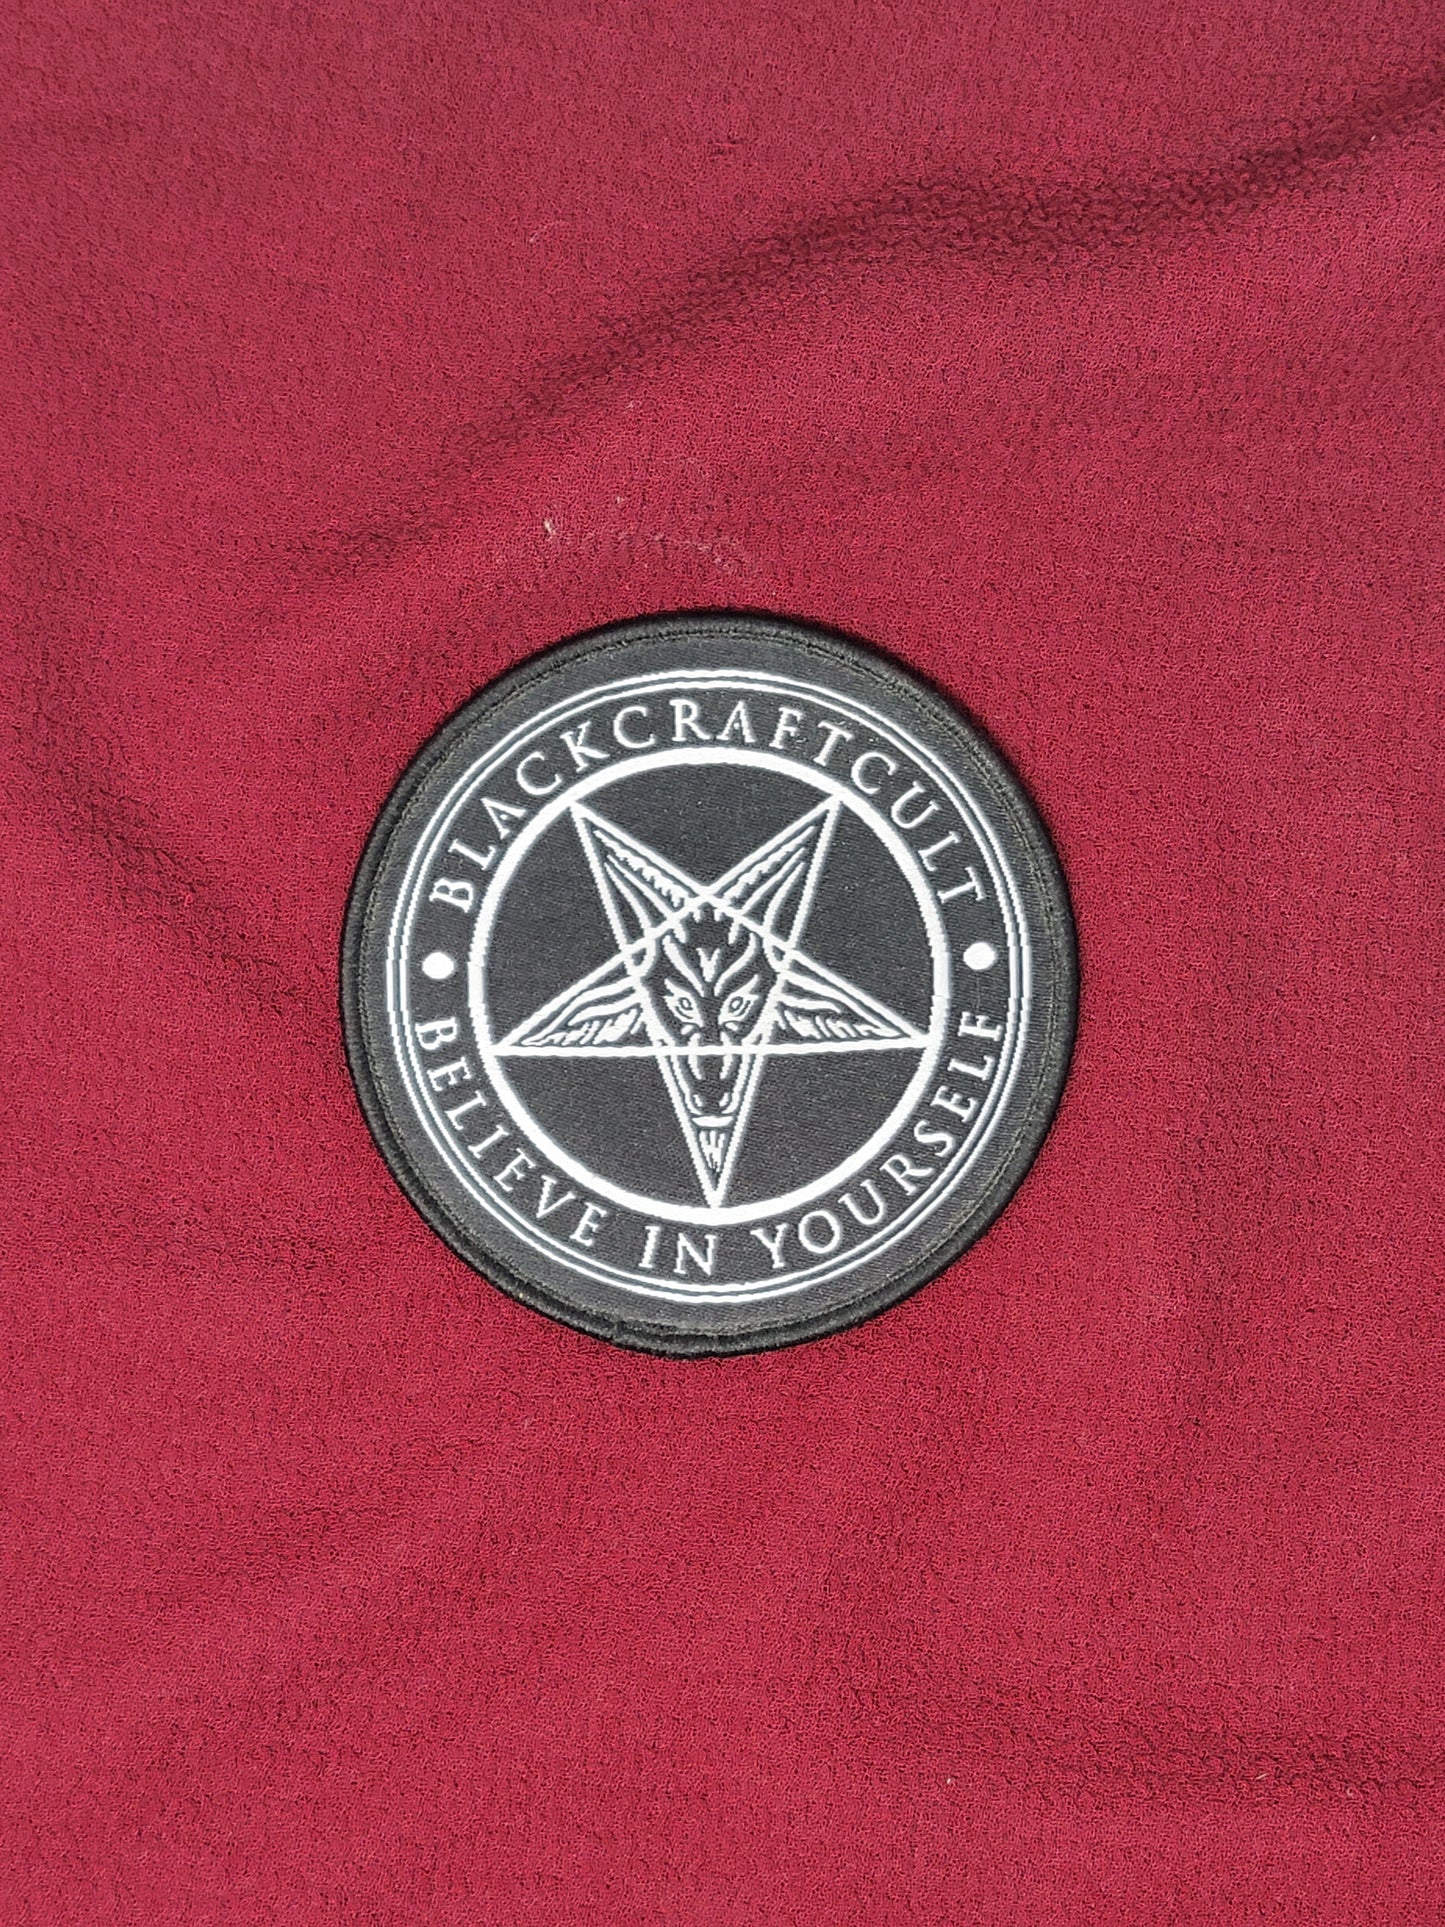 Blackcraft Cult Believe In Yourself Iron-on Patch